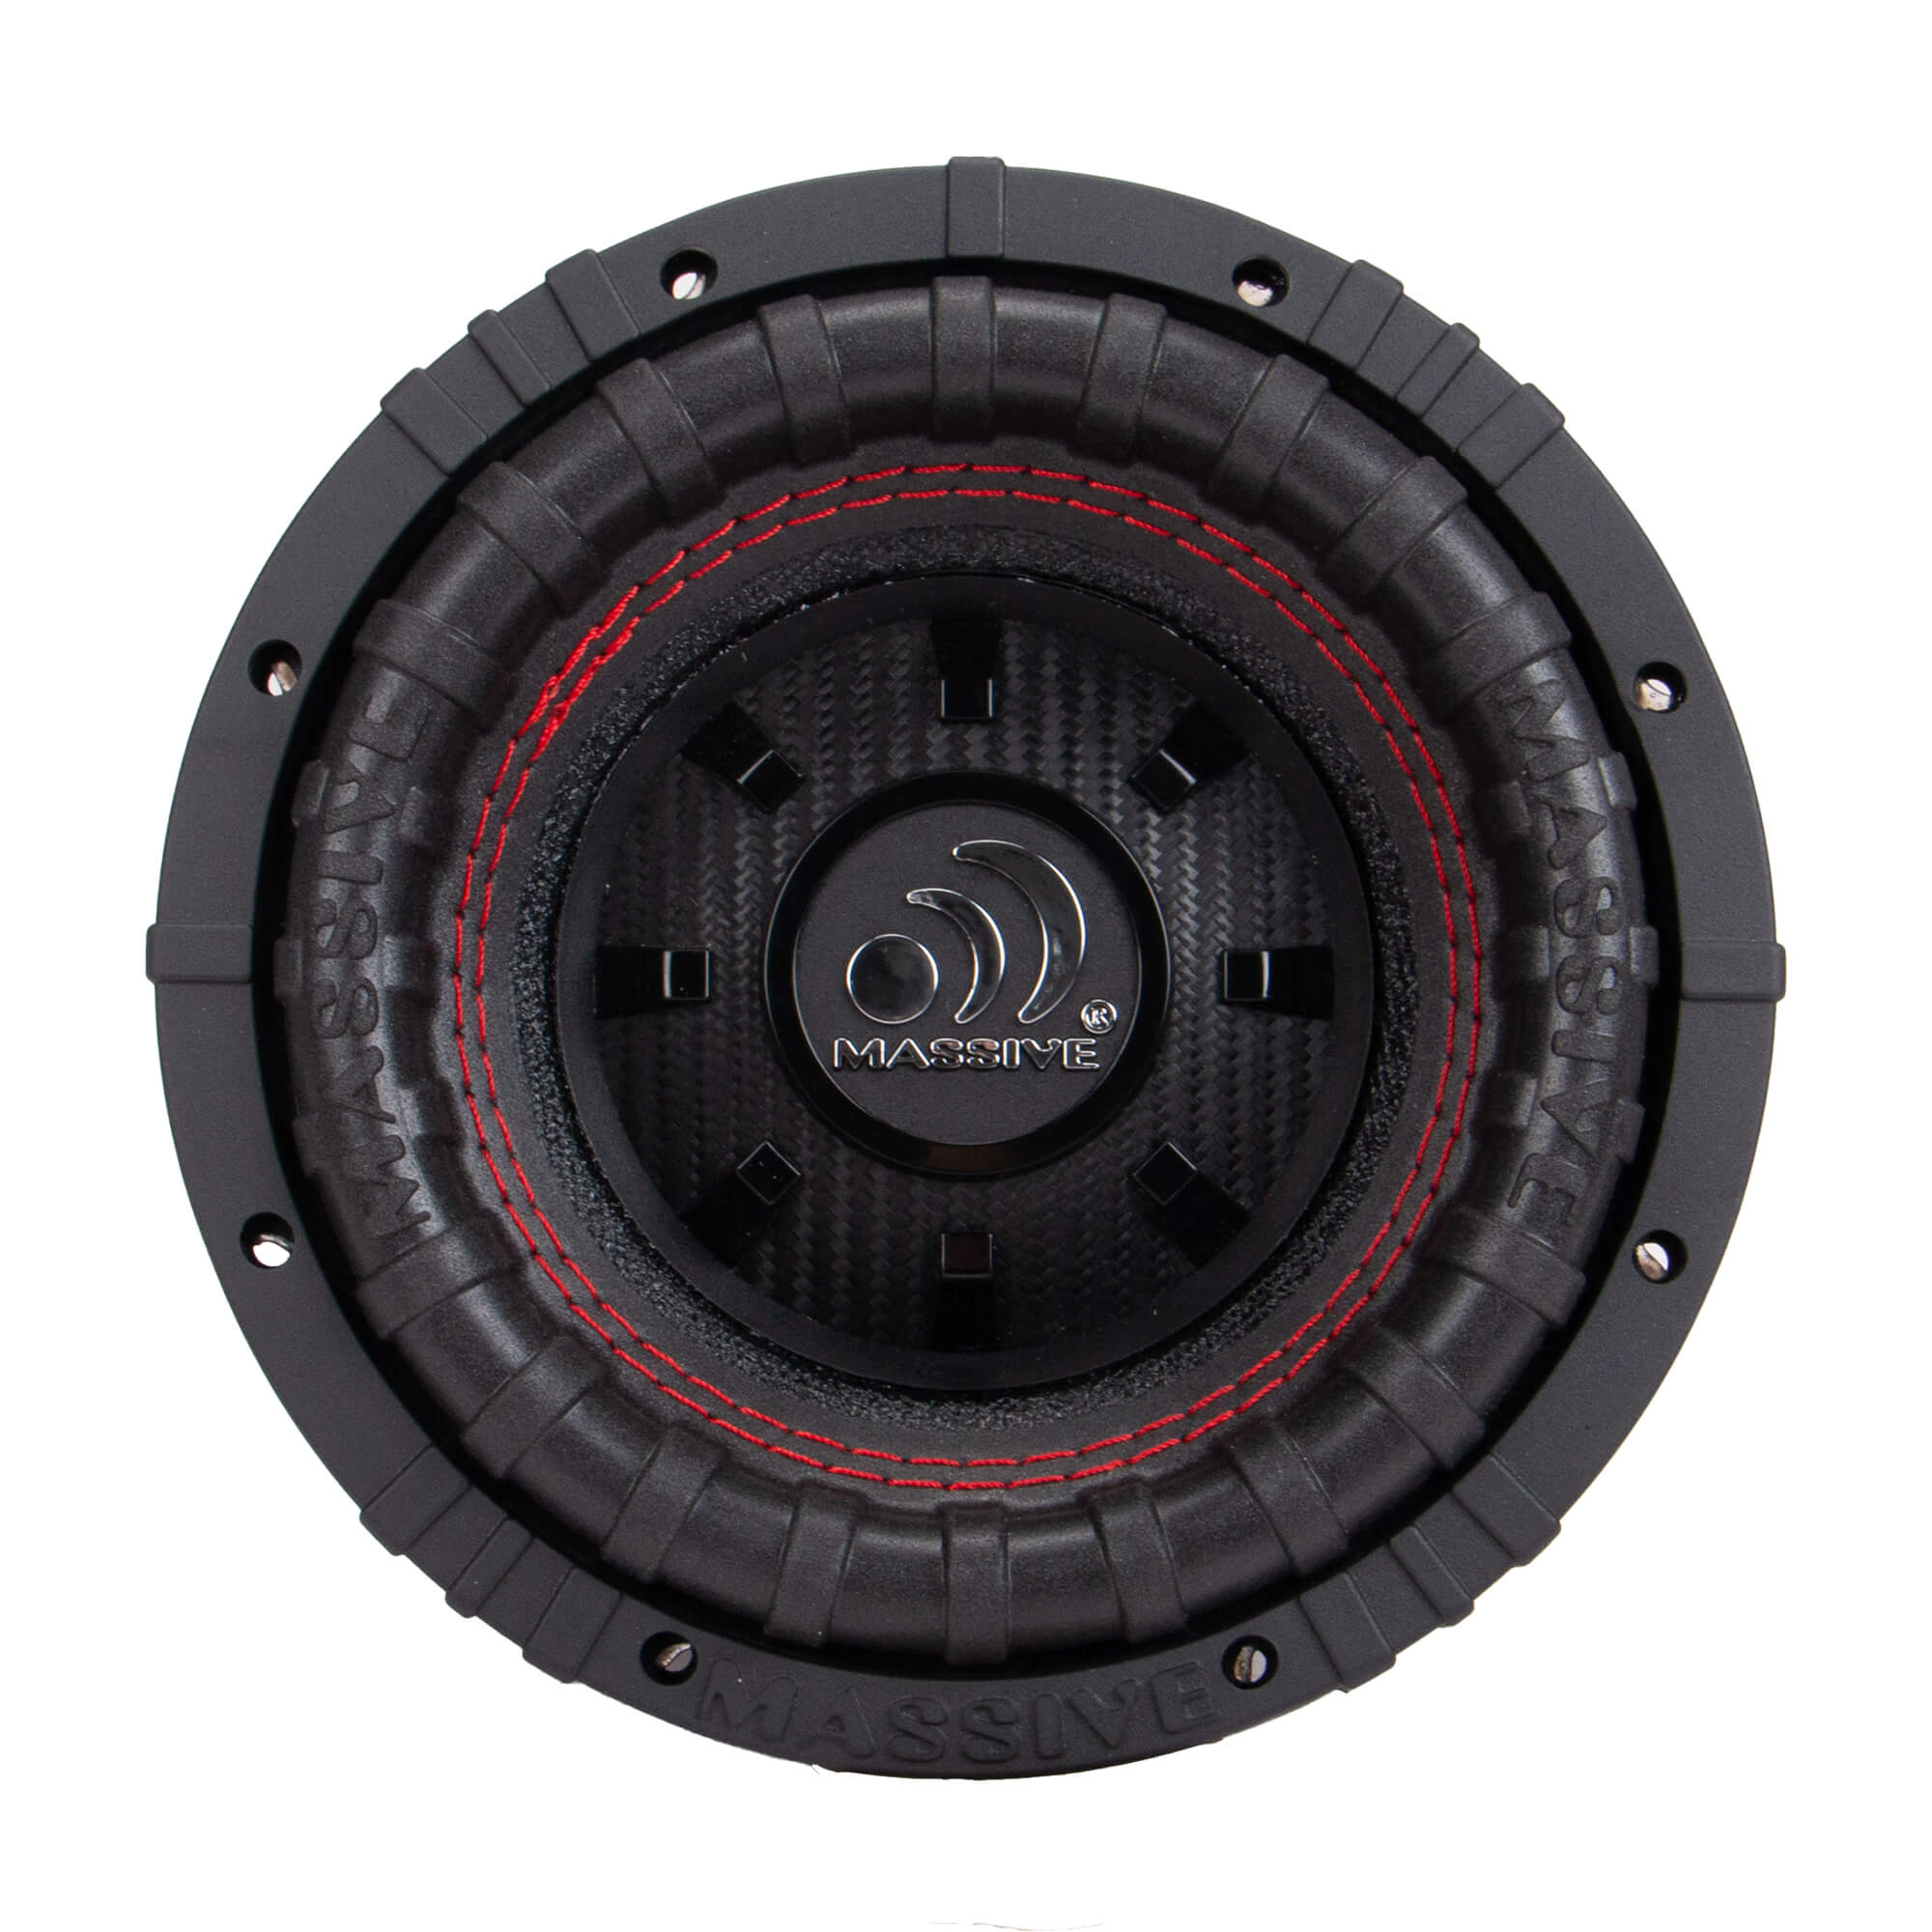 GTR64 - 6" 250 Watts RMS Dual 4 Ohm Subwoofer